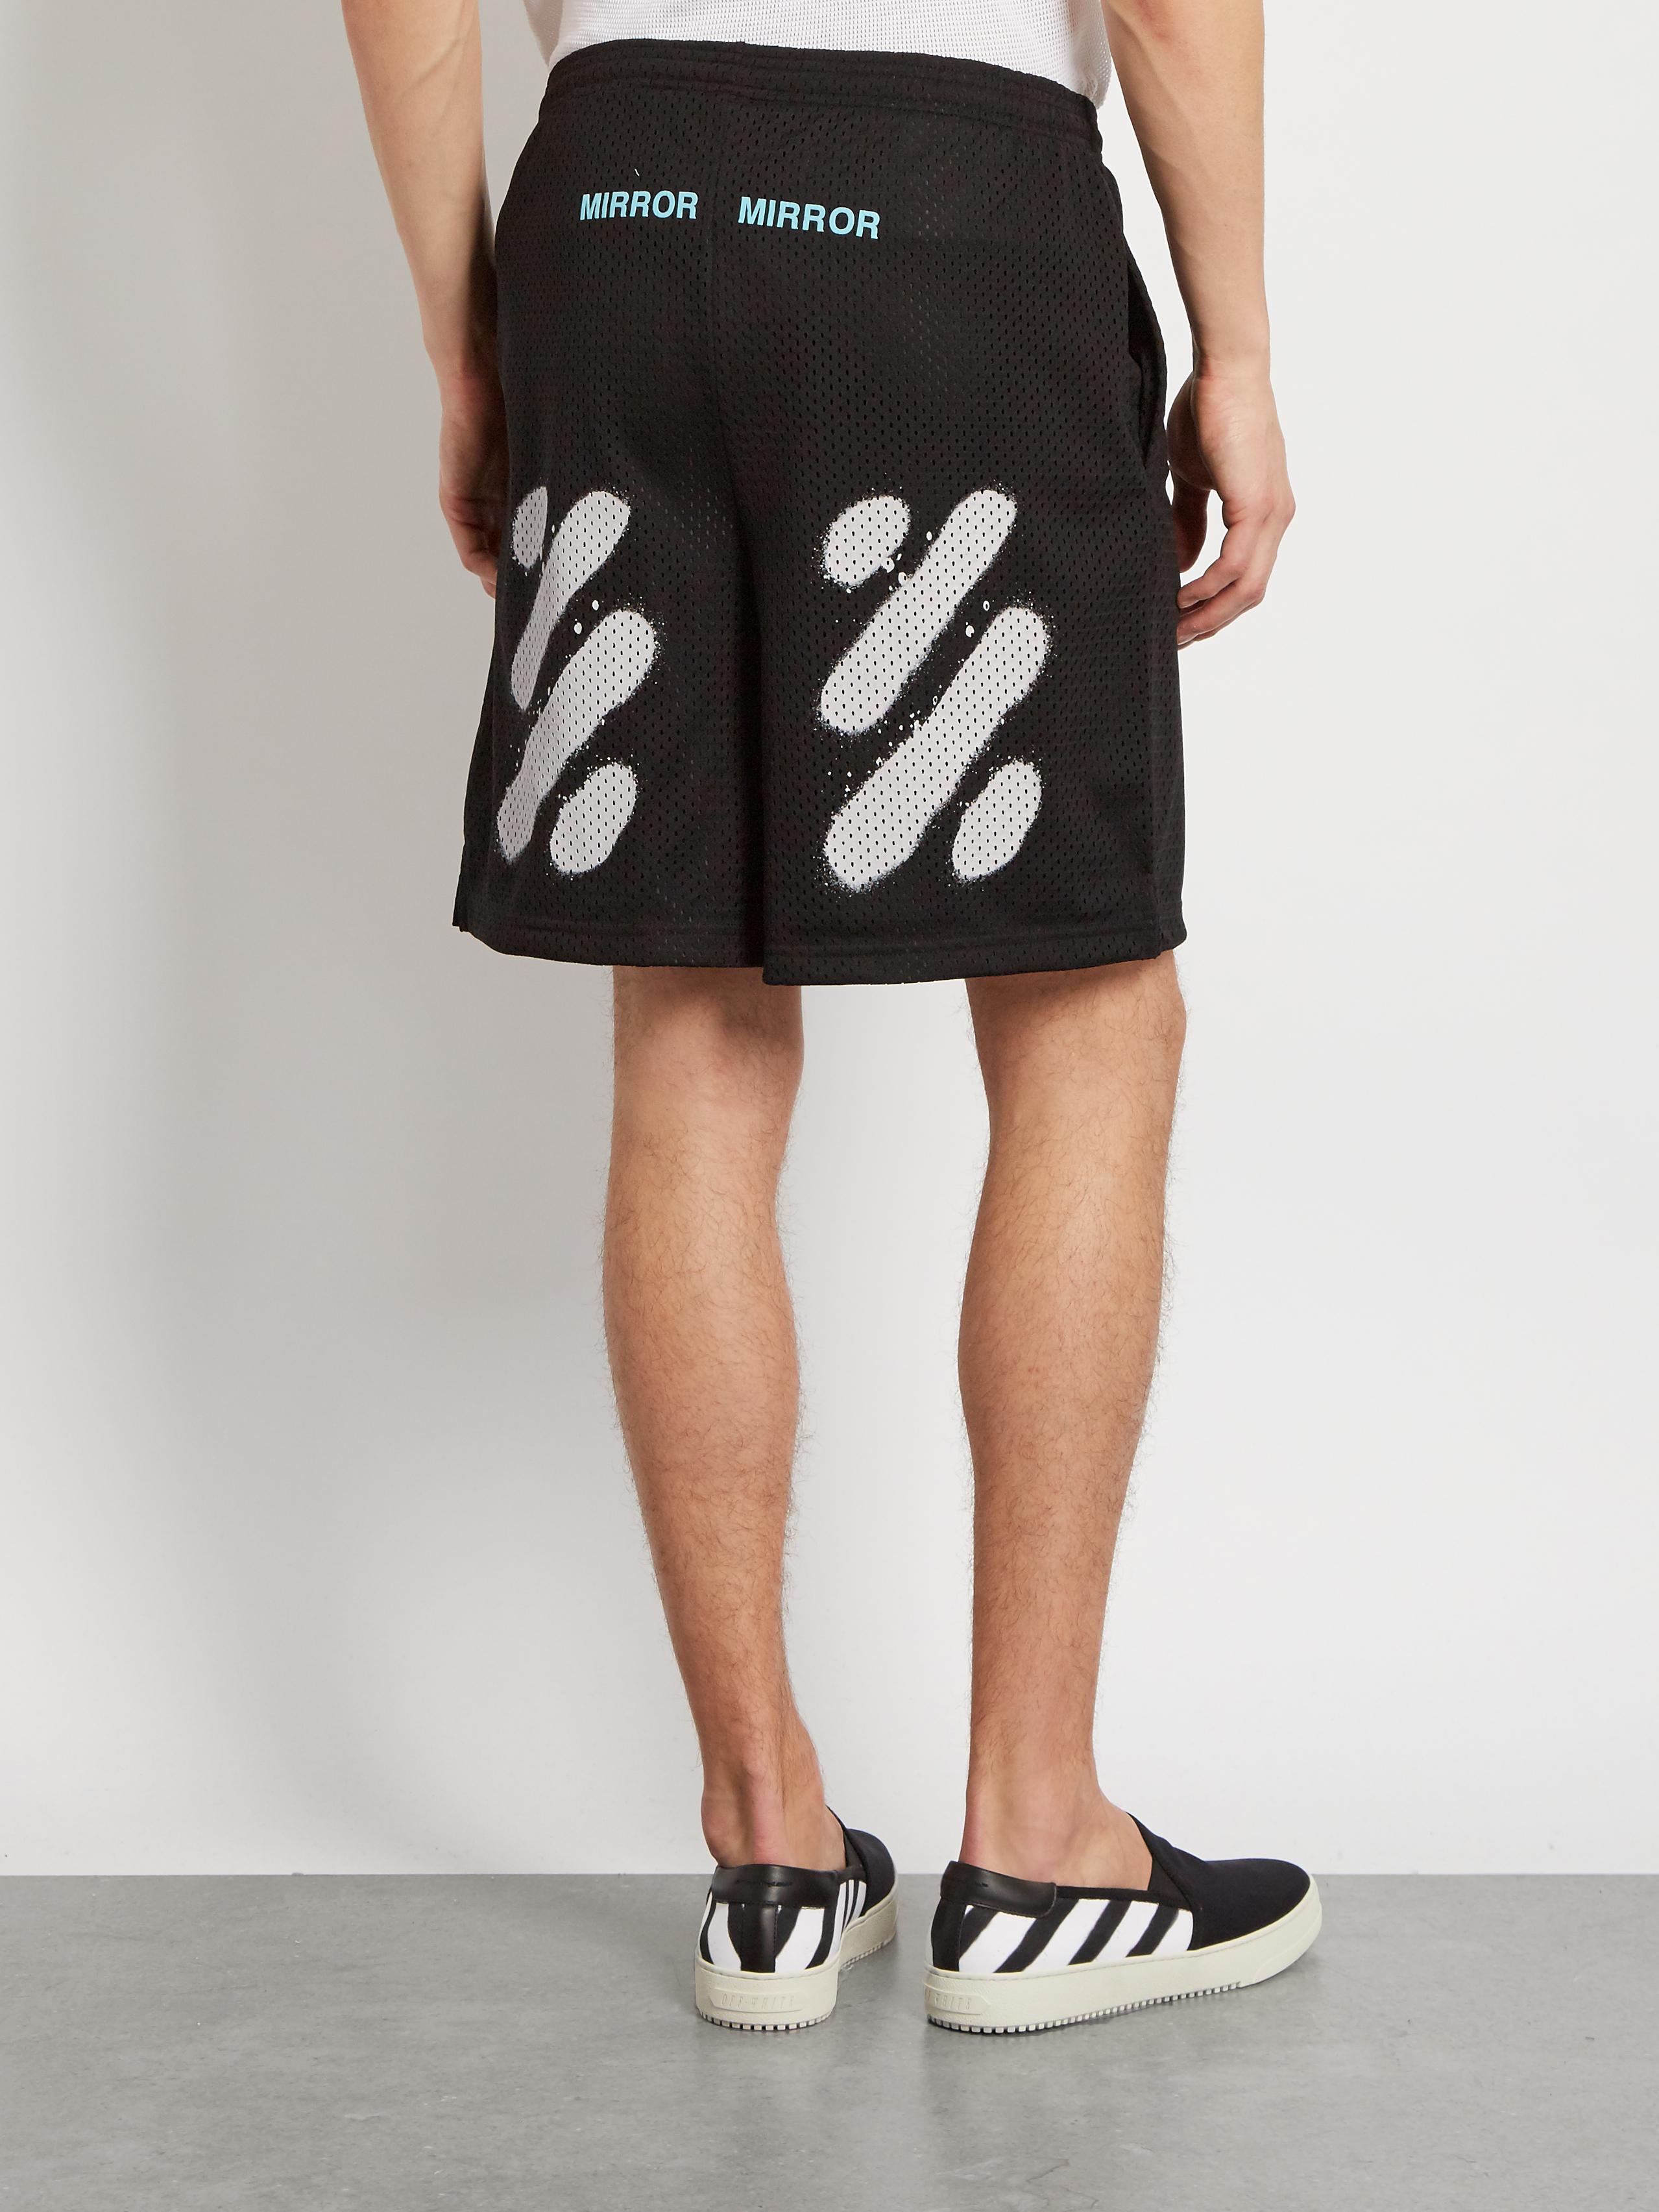 Off-White c/o Virgil Abloh Synthetic Spray-paint Shorts in Black for Men - Lyst